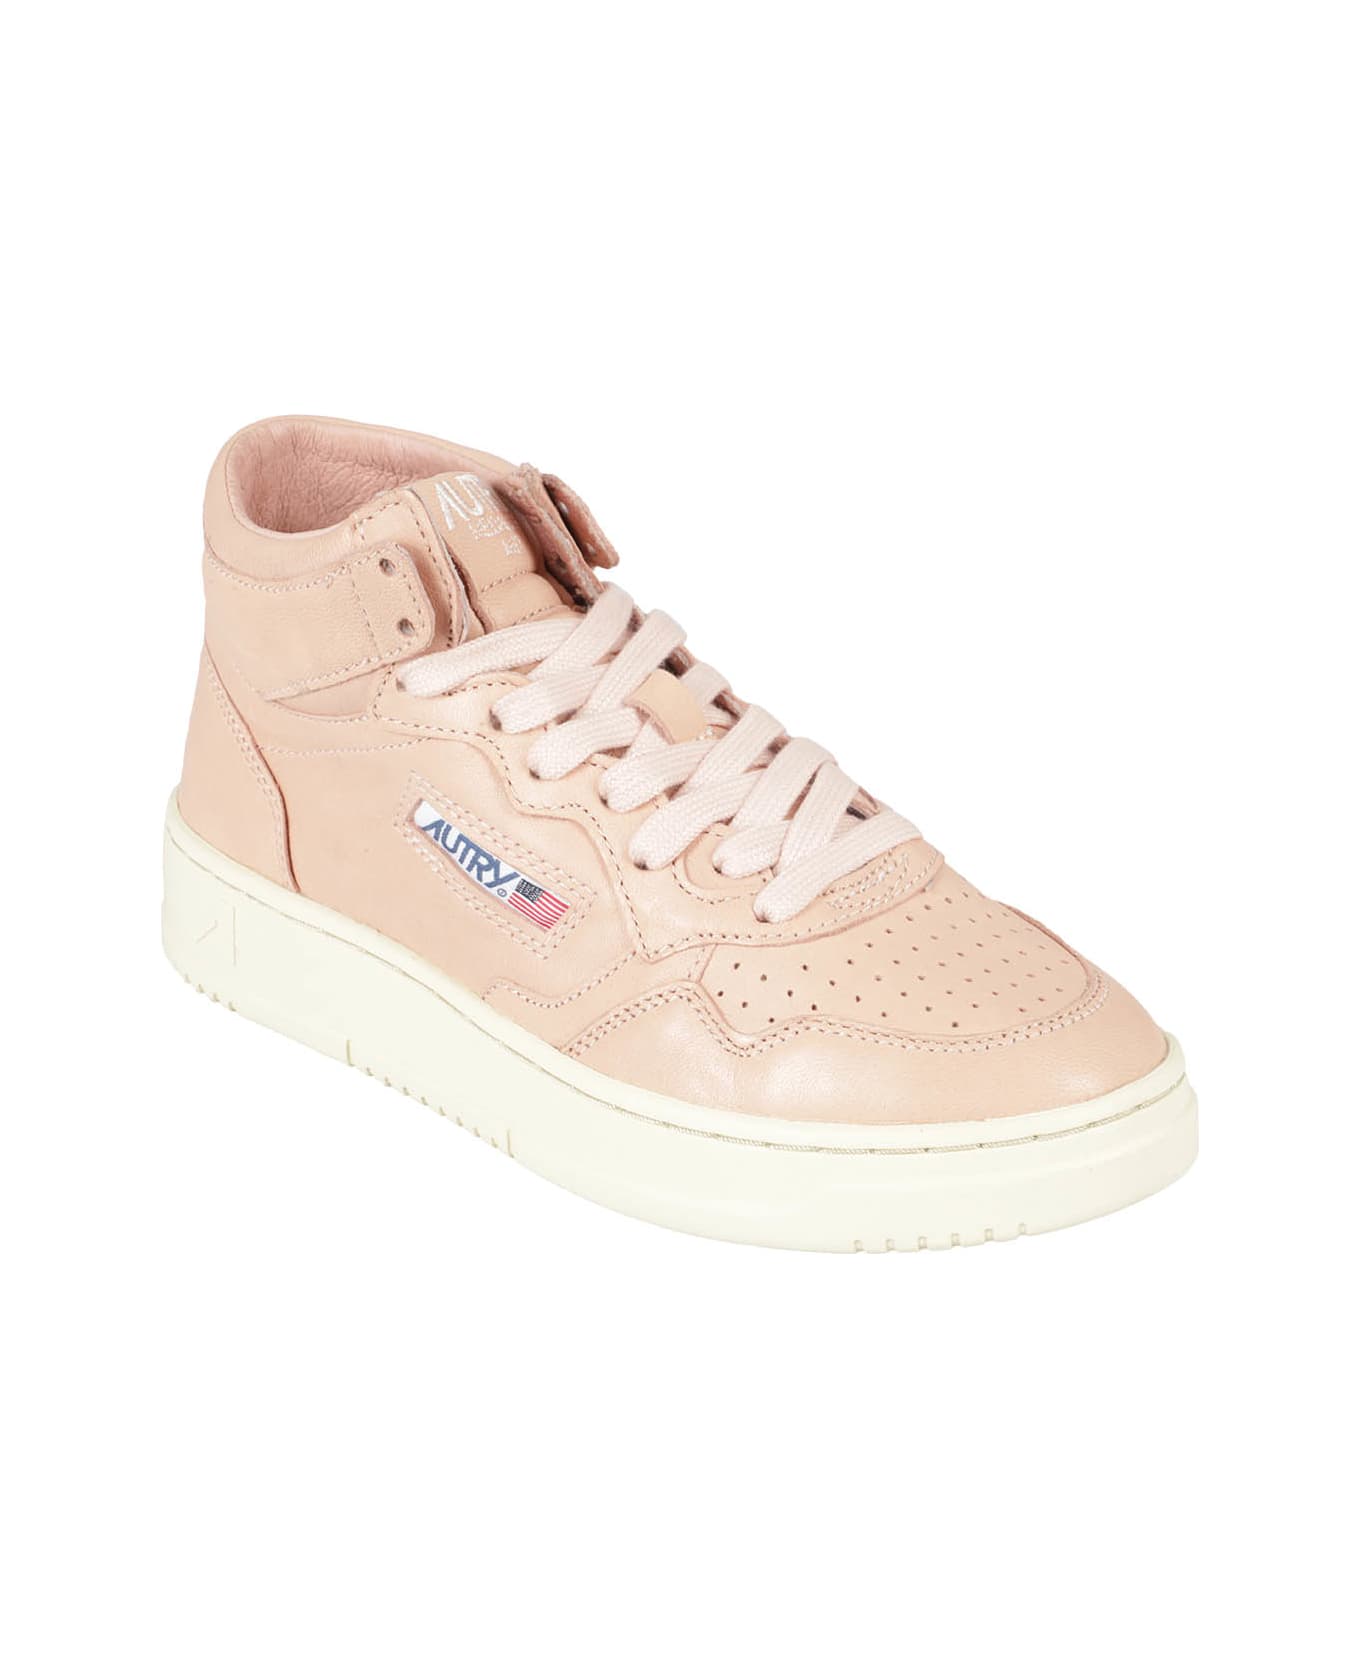 Autry Sneakers - Goat Peach